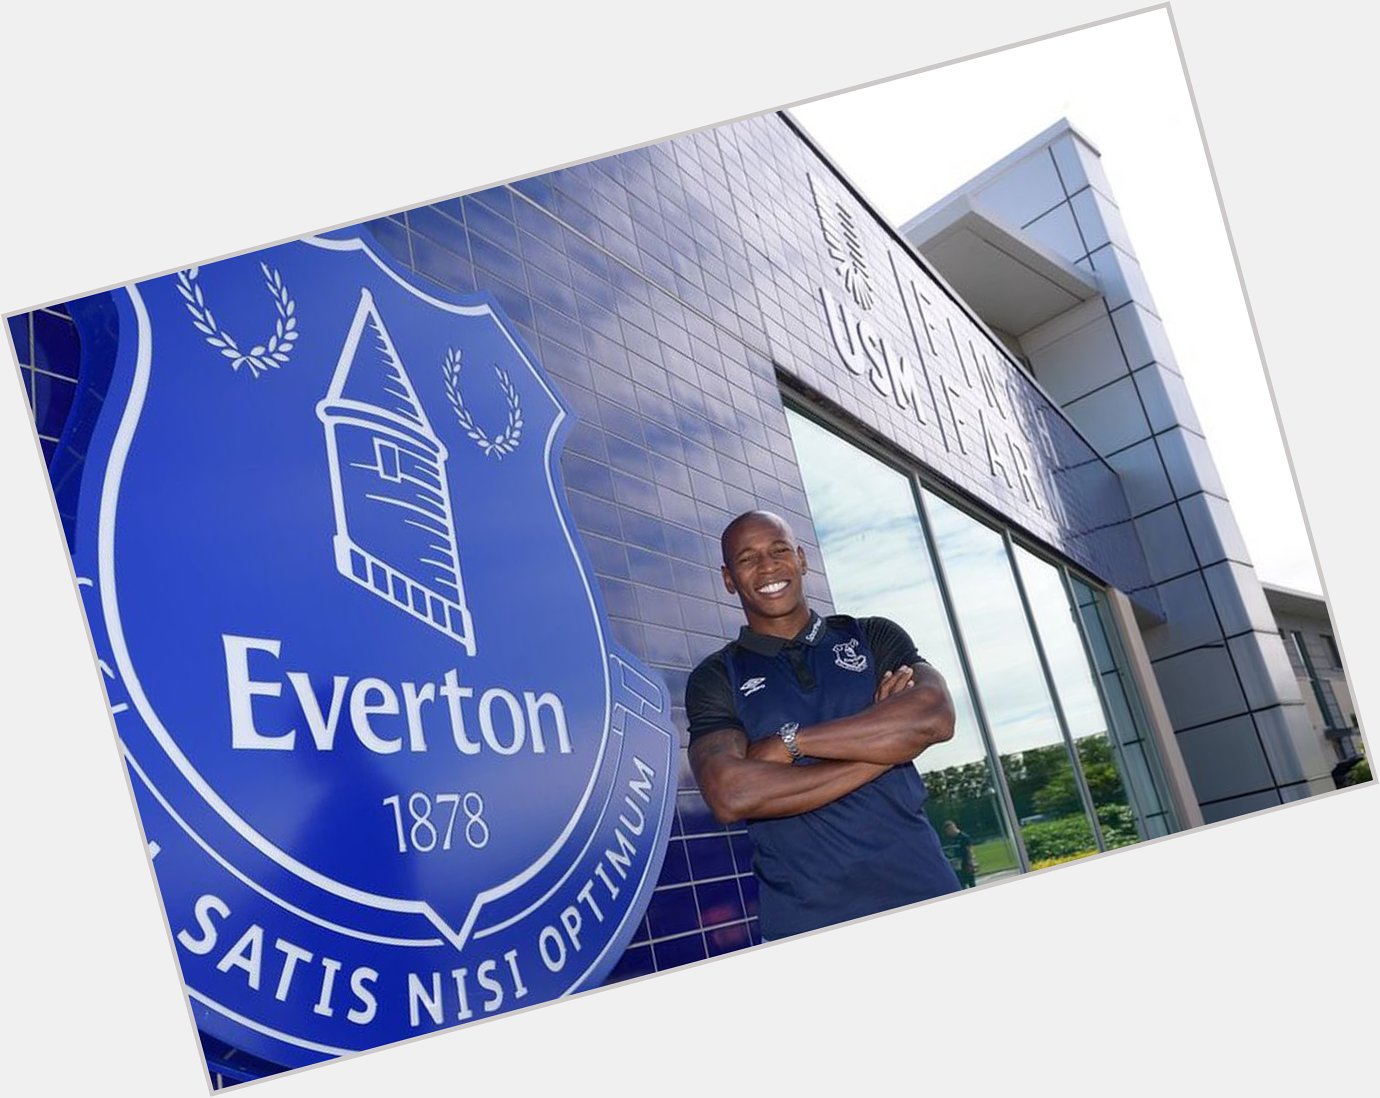  Happy 42nd Birthday to Everton assistant manager Luis Boa Morte! 